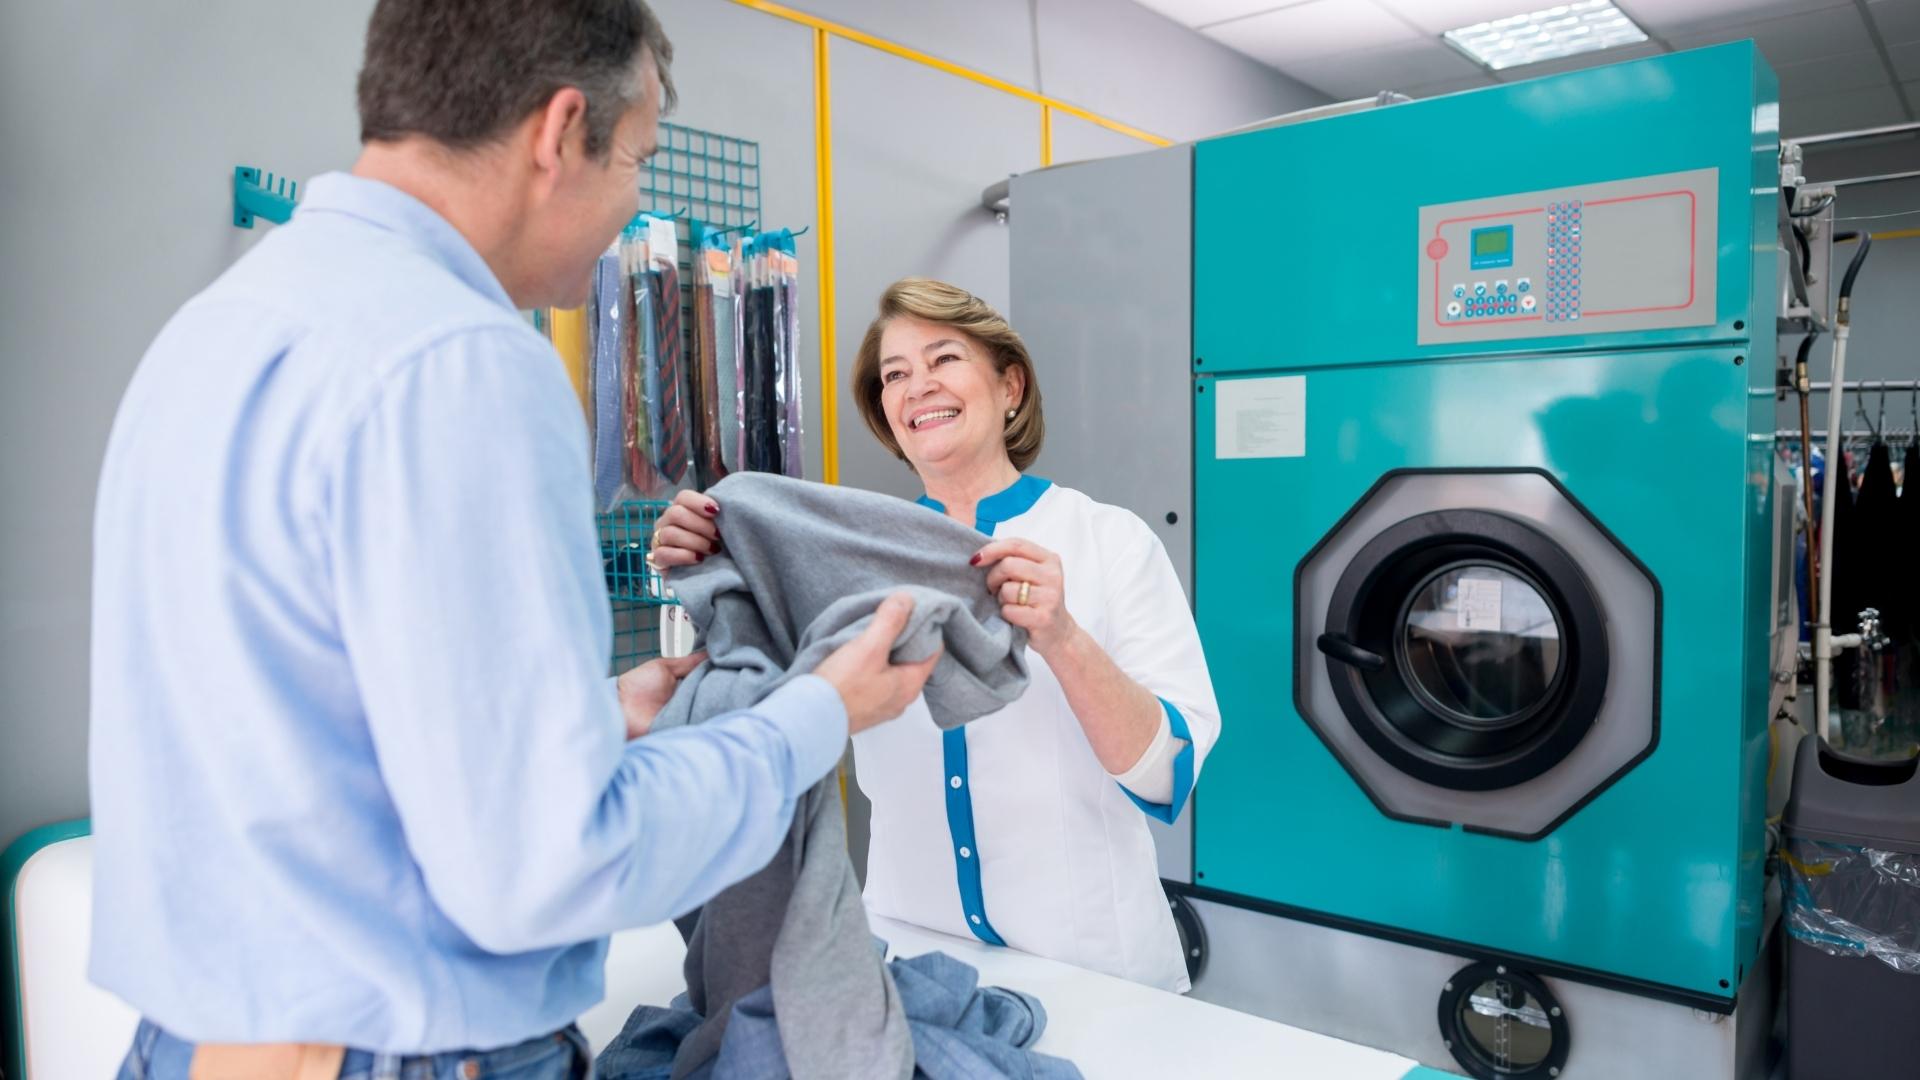 A man talking with an attendant at a laundry service